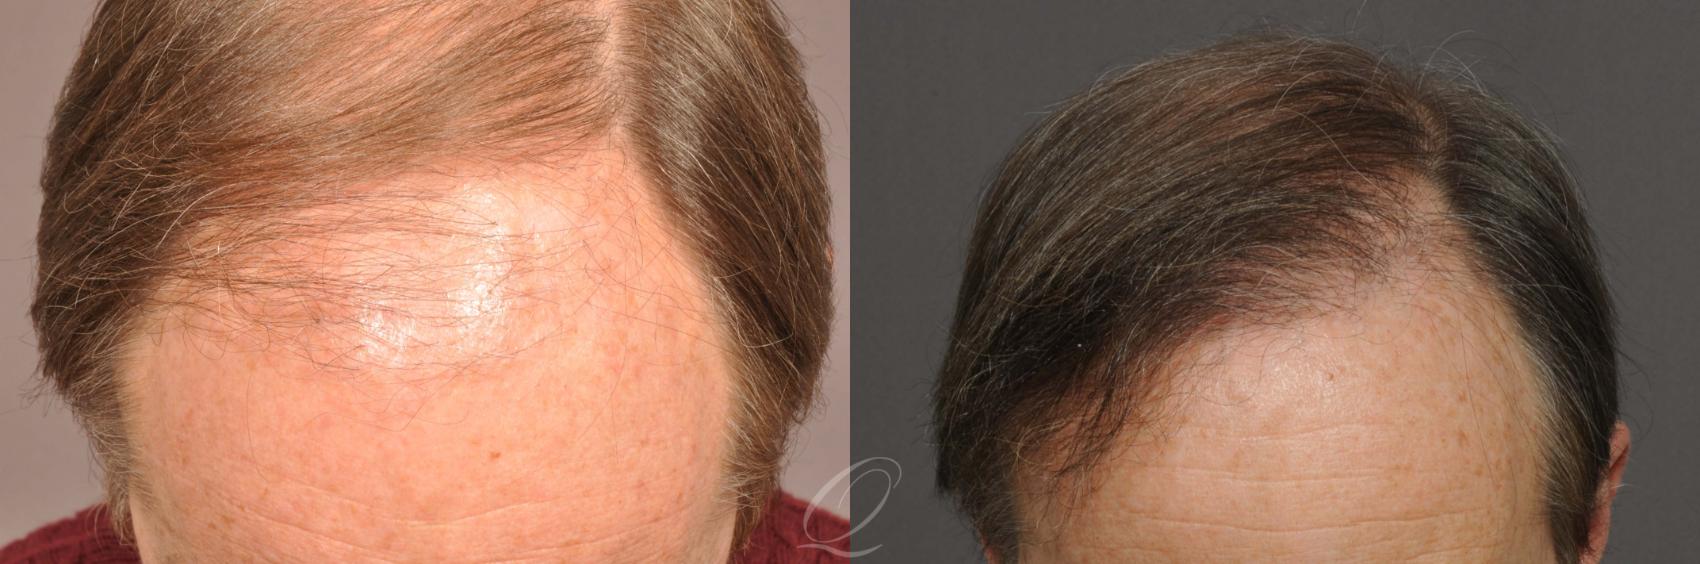 FUT Case 1021 Before & After View #2 | Rochester, Buffalo, & Syracuse, NY | Quatela Center for Hair Restoration